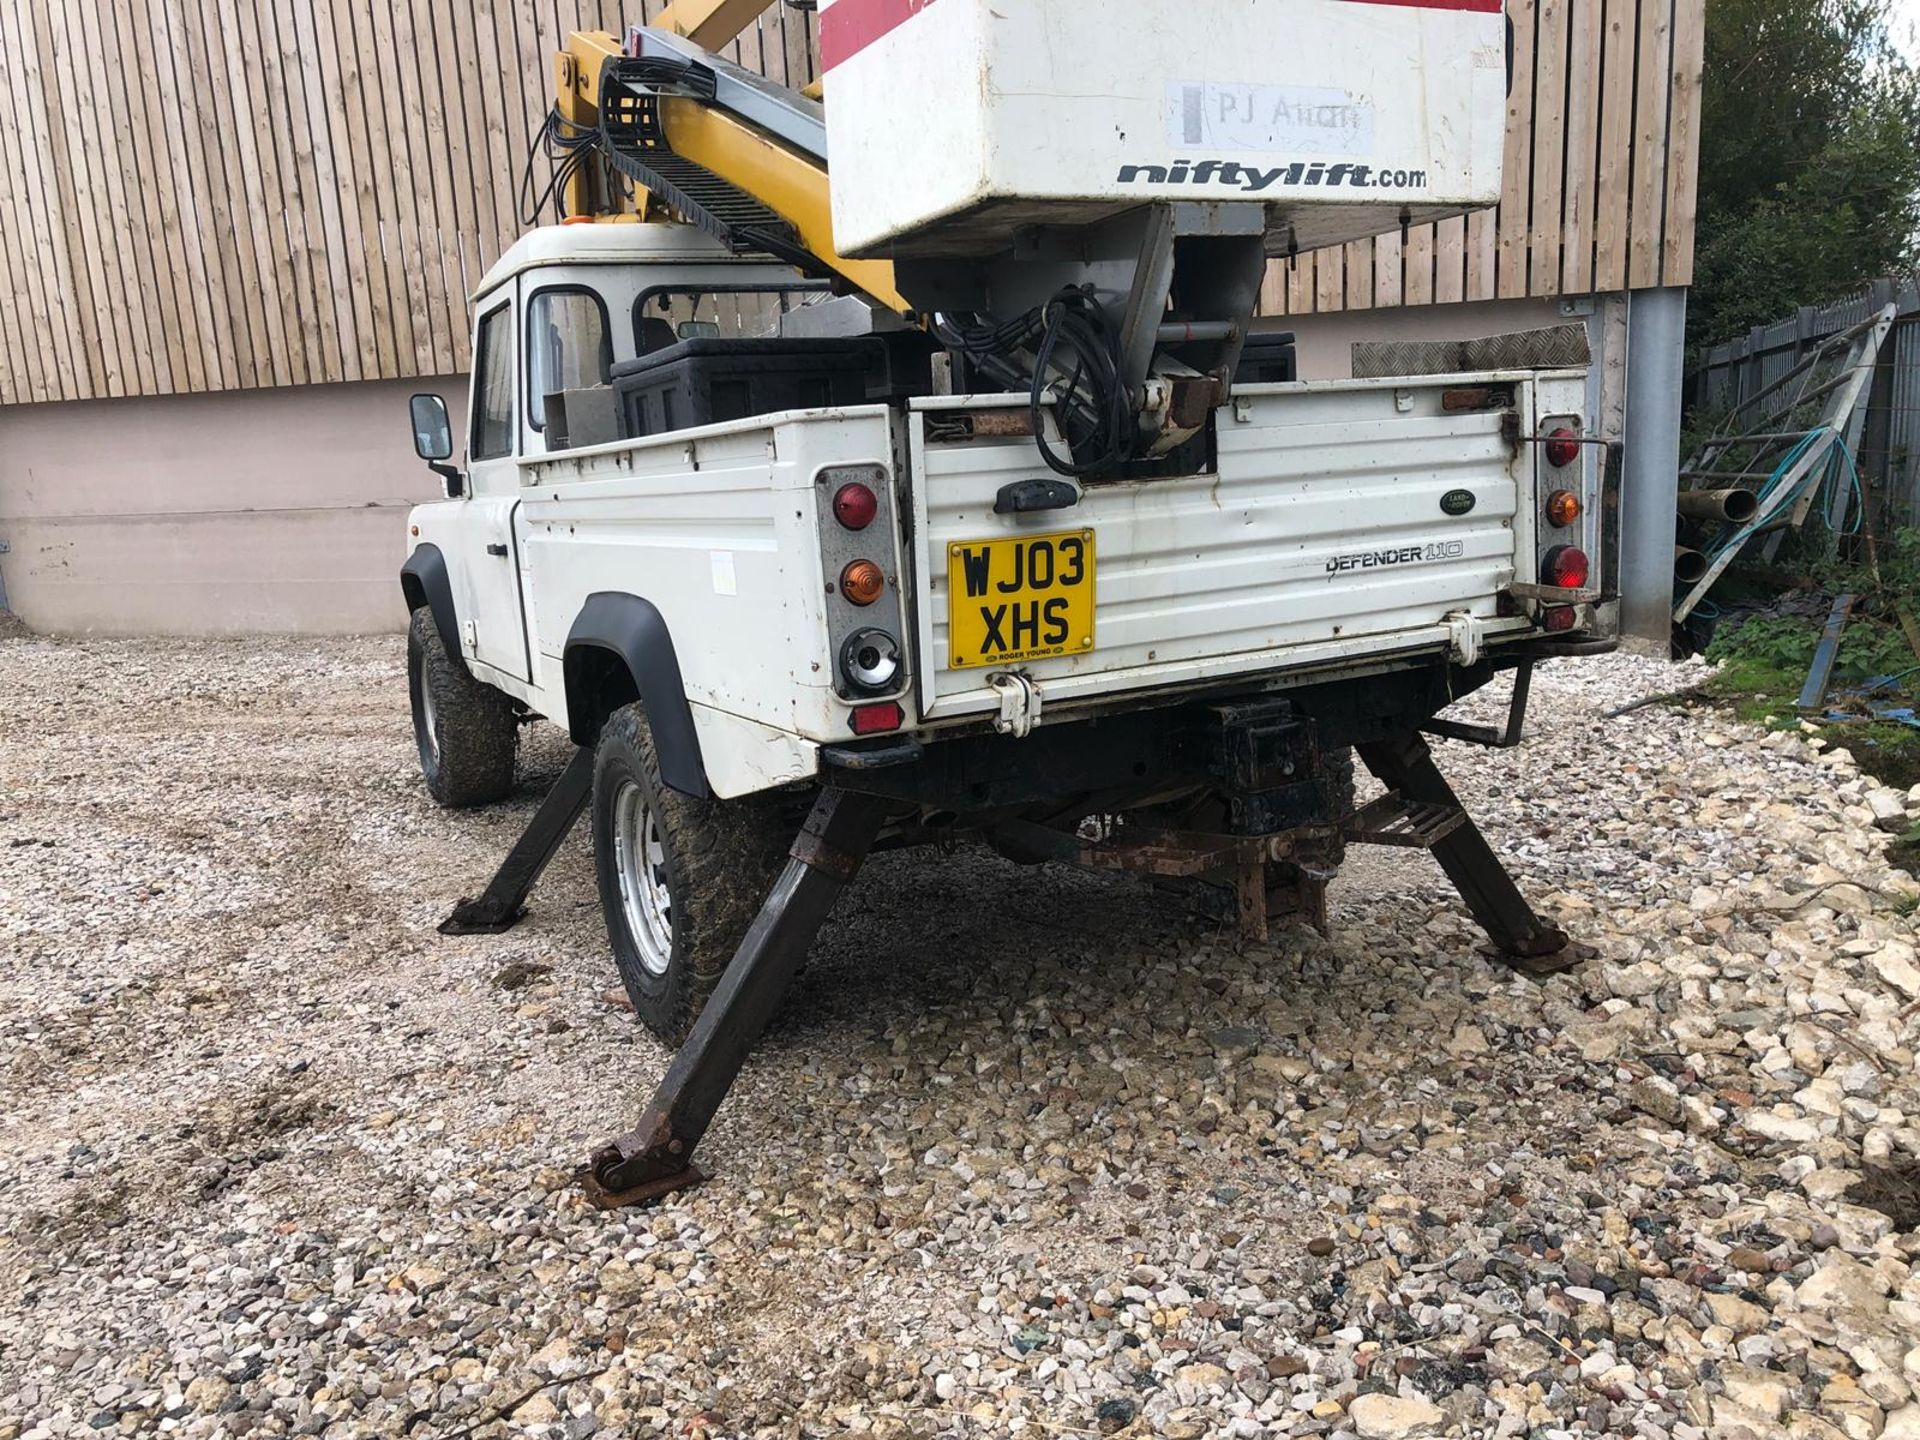 2003/03 REG WHITE LAND ROVER DEFENDER 110 4X4 TD5 WITH NIFTY LIFT CHERRY PICKER *PLUS VAT* - Image 5 of 30